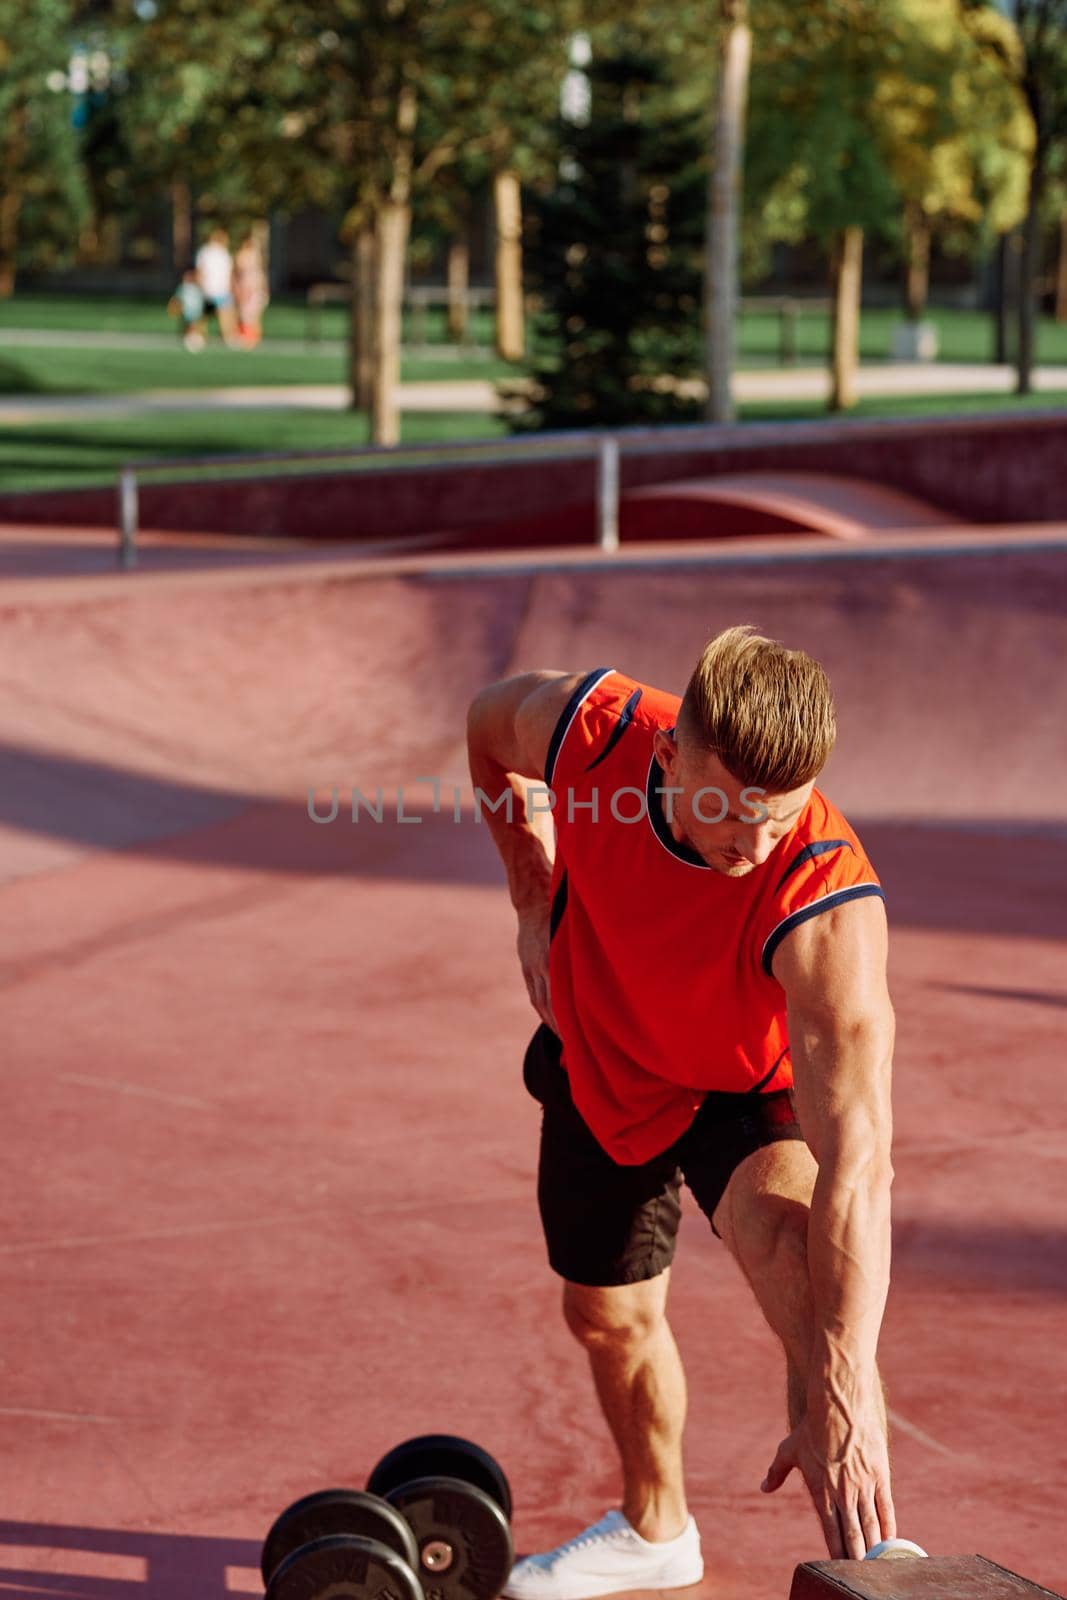 sporty man workout outdoors playground lifestyle. High quality photo